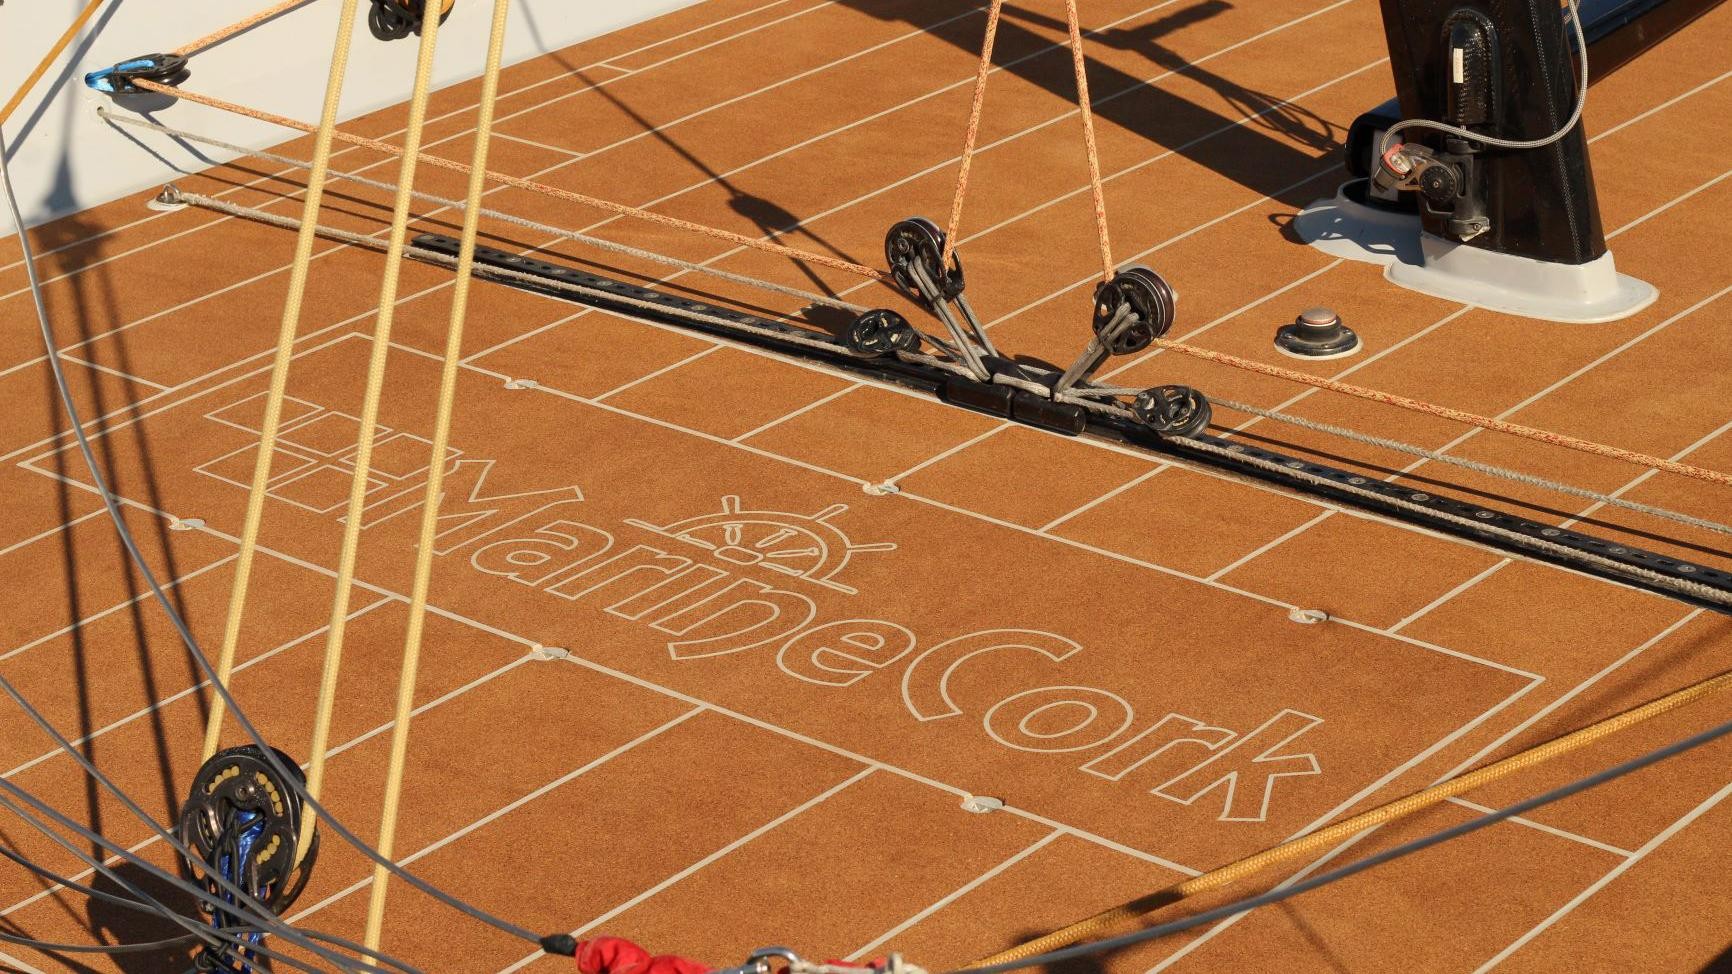 MarineCork, the ethical decking for boats